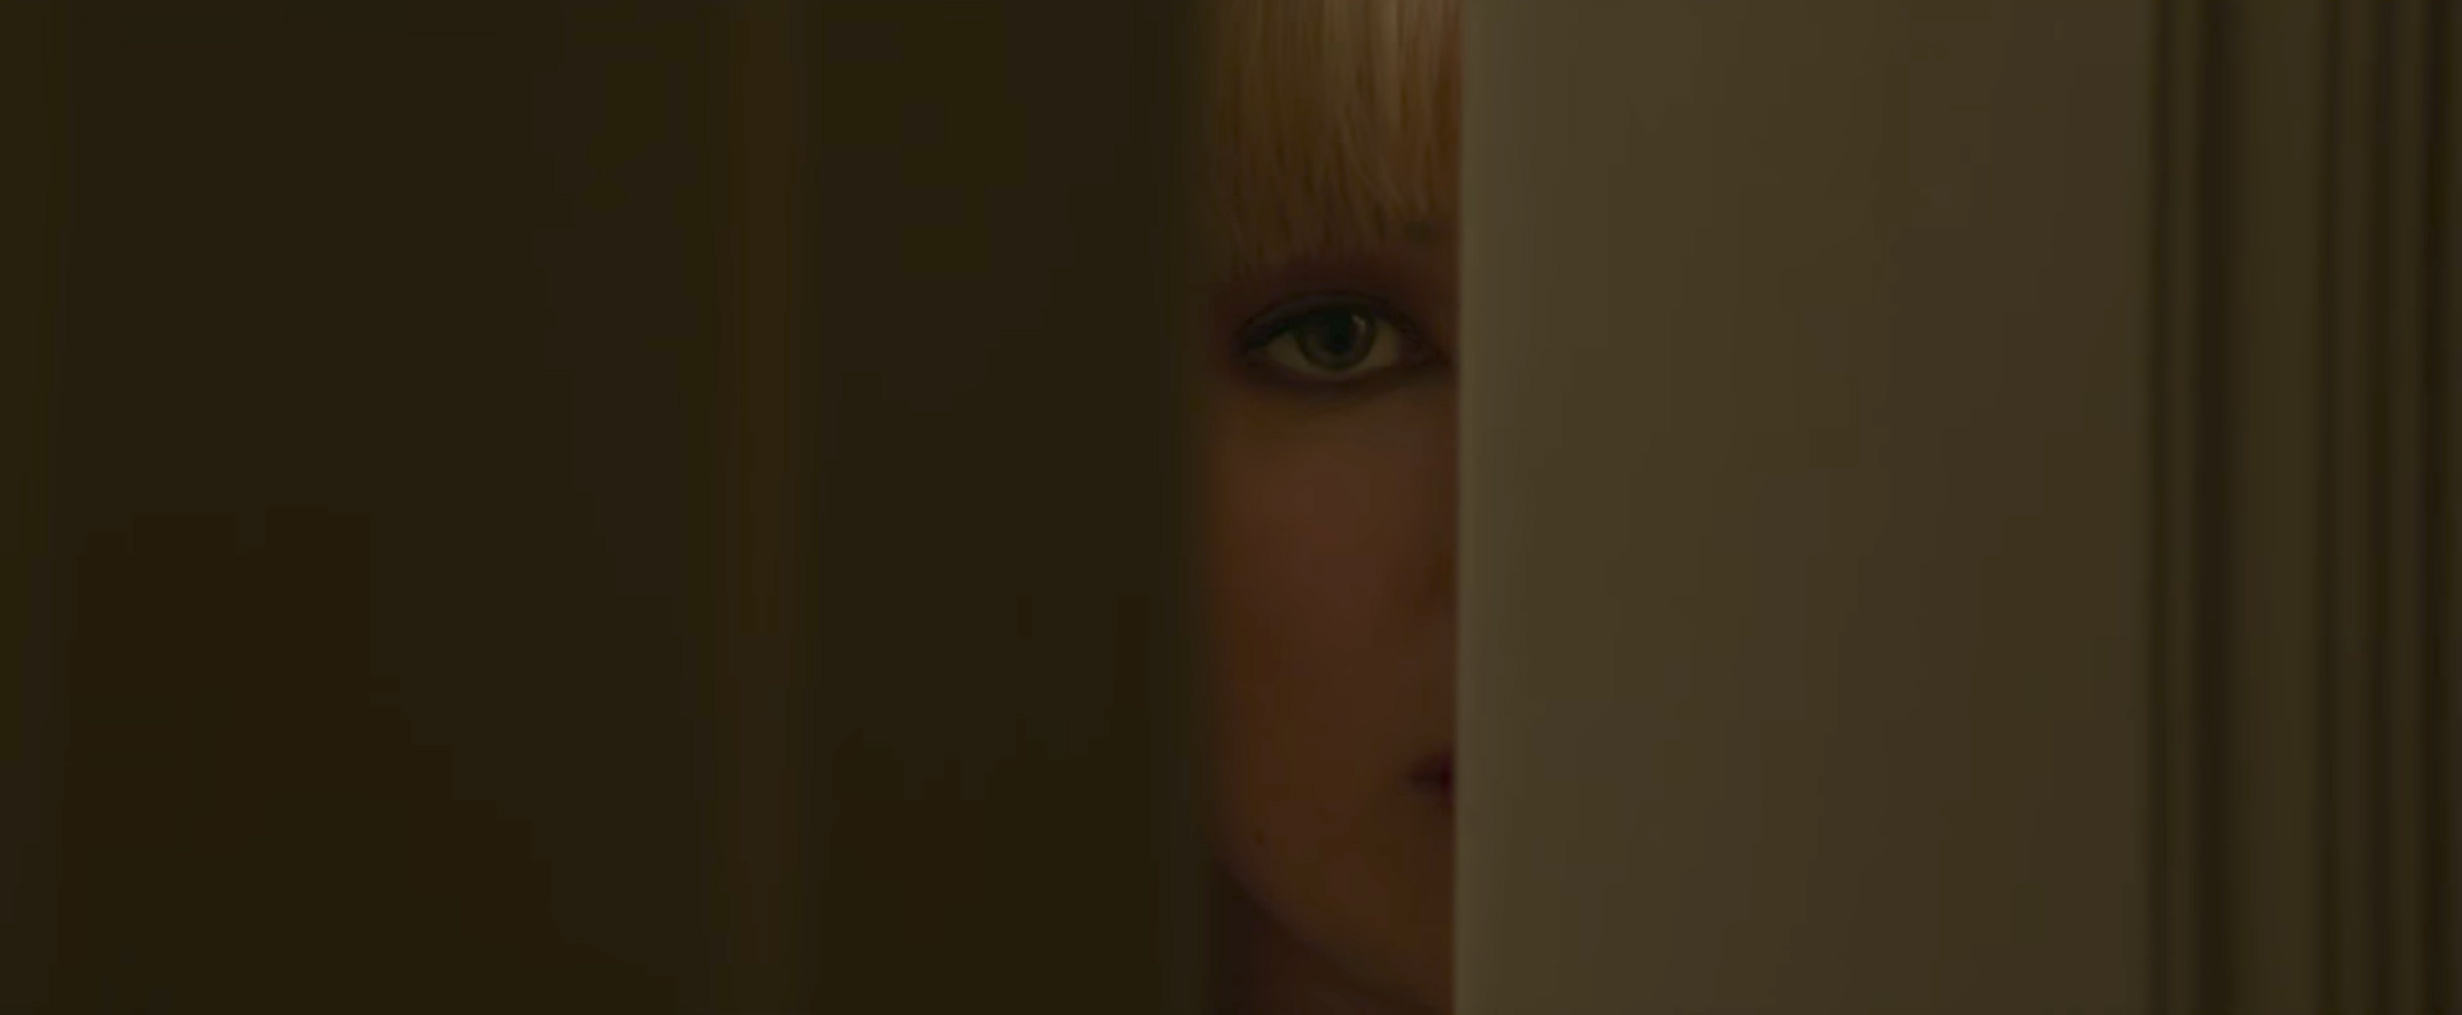 Jennifer Lawrence RED SPARROW peeping through the door